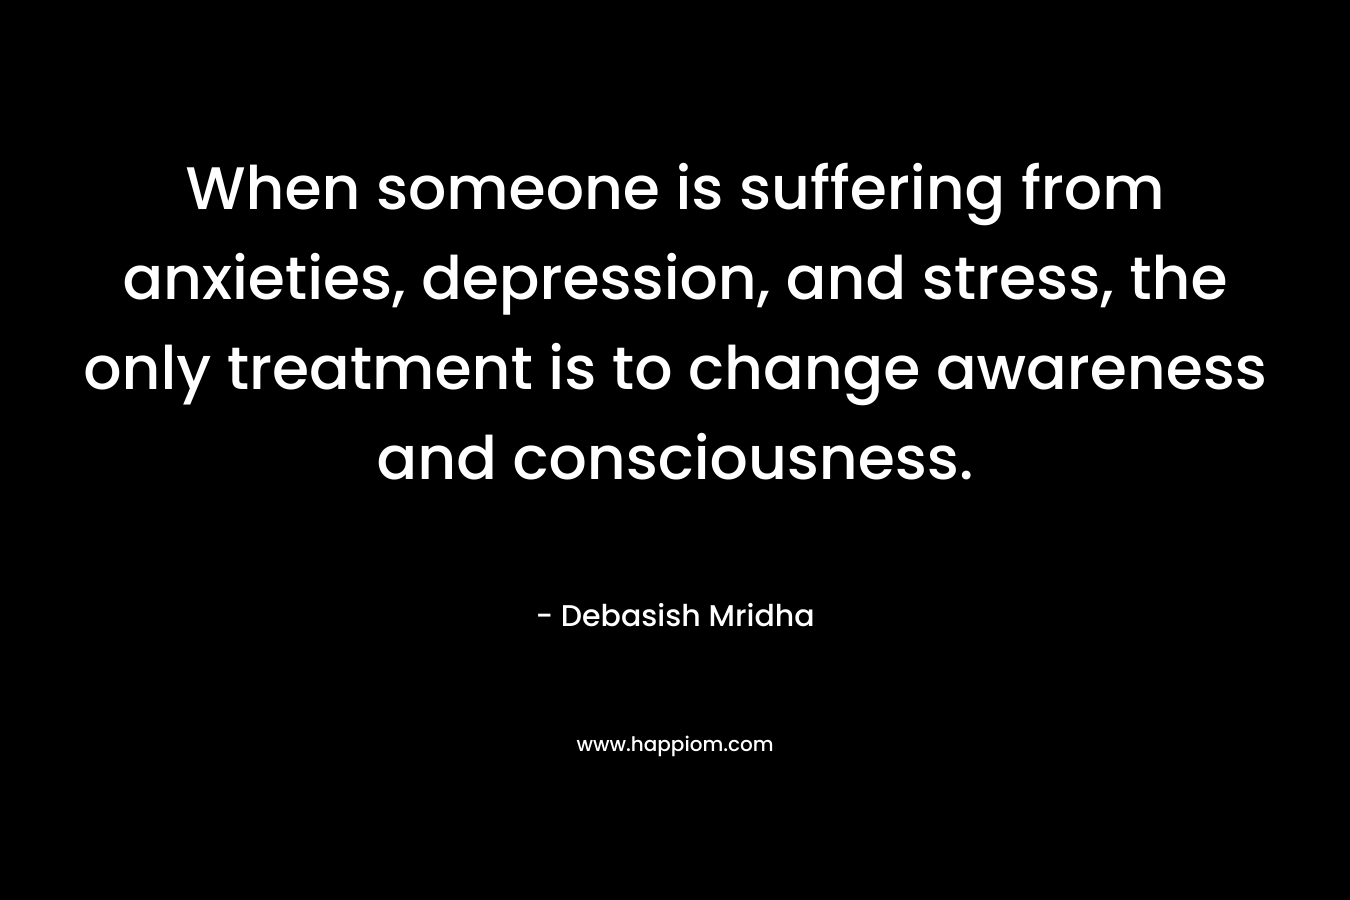 When someone is suffering from anxieties, depression, and stress, the only treatment is to change awareness and consciousness.